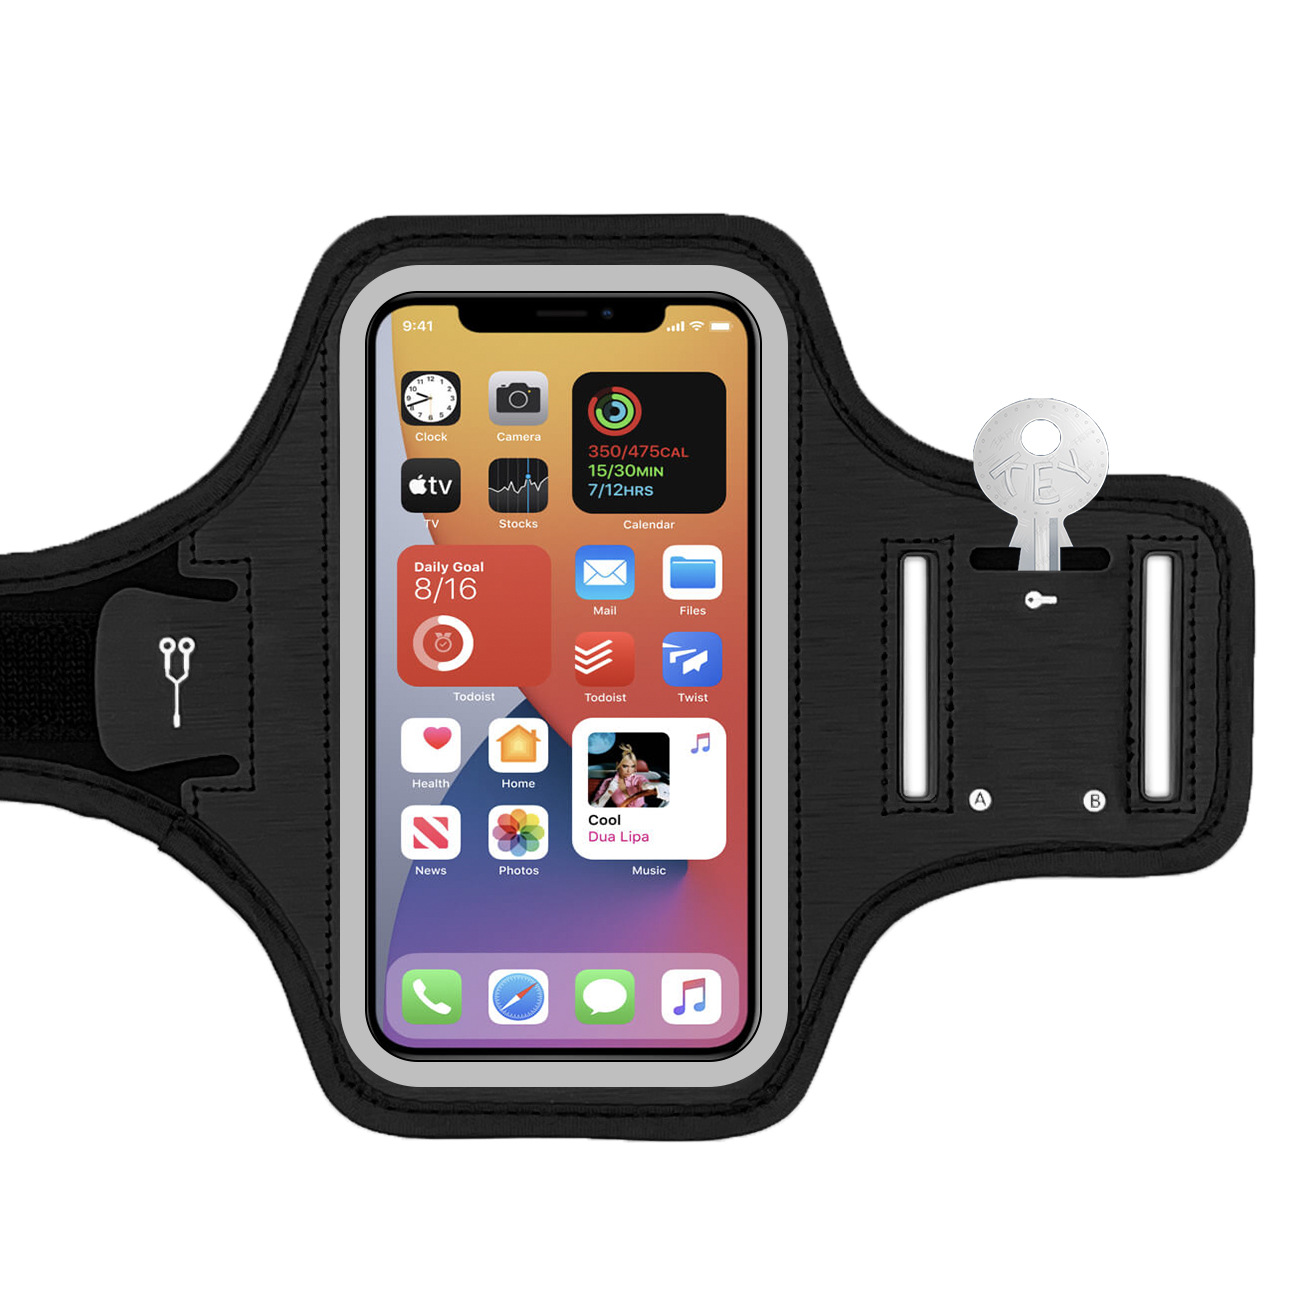 New Outdoor Sports Arm Bag Men And Women Fitness Running Mobile Phone Bag Velcro Waterproof Reflective Armband Wrist Bag